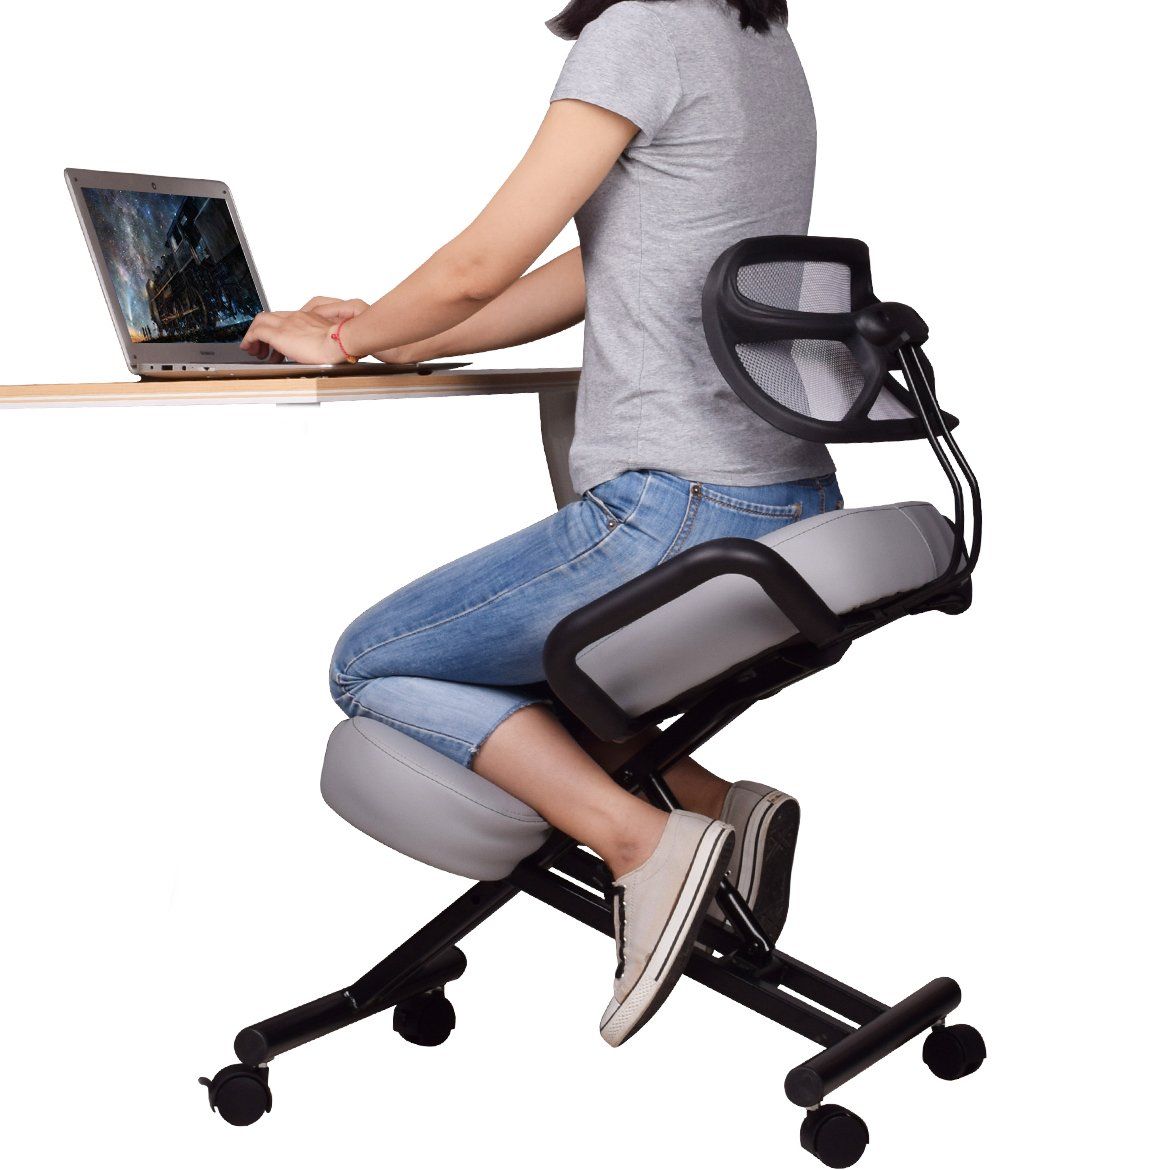 Great way of lifestyle: kneeling chair